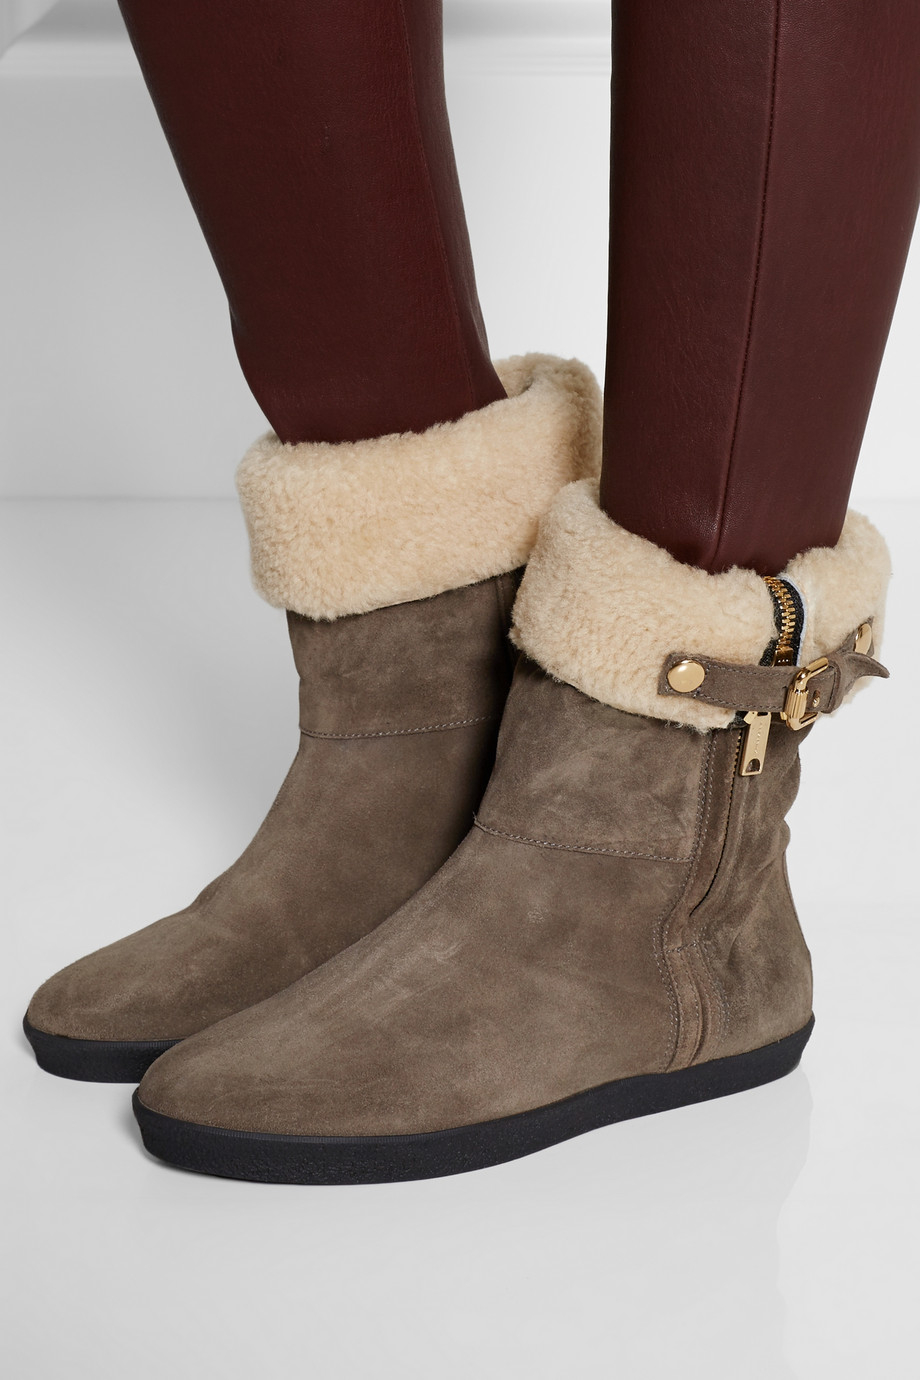 Burberry Shearling-Lined Suede Ankle Boots in Gray - Lyst